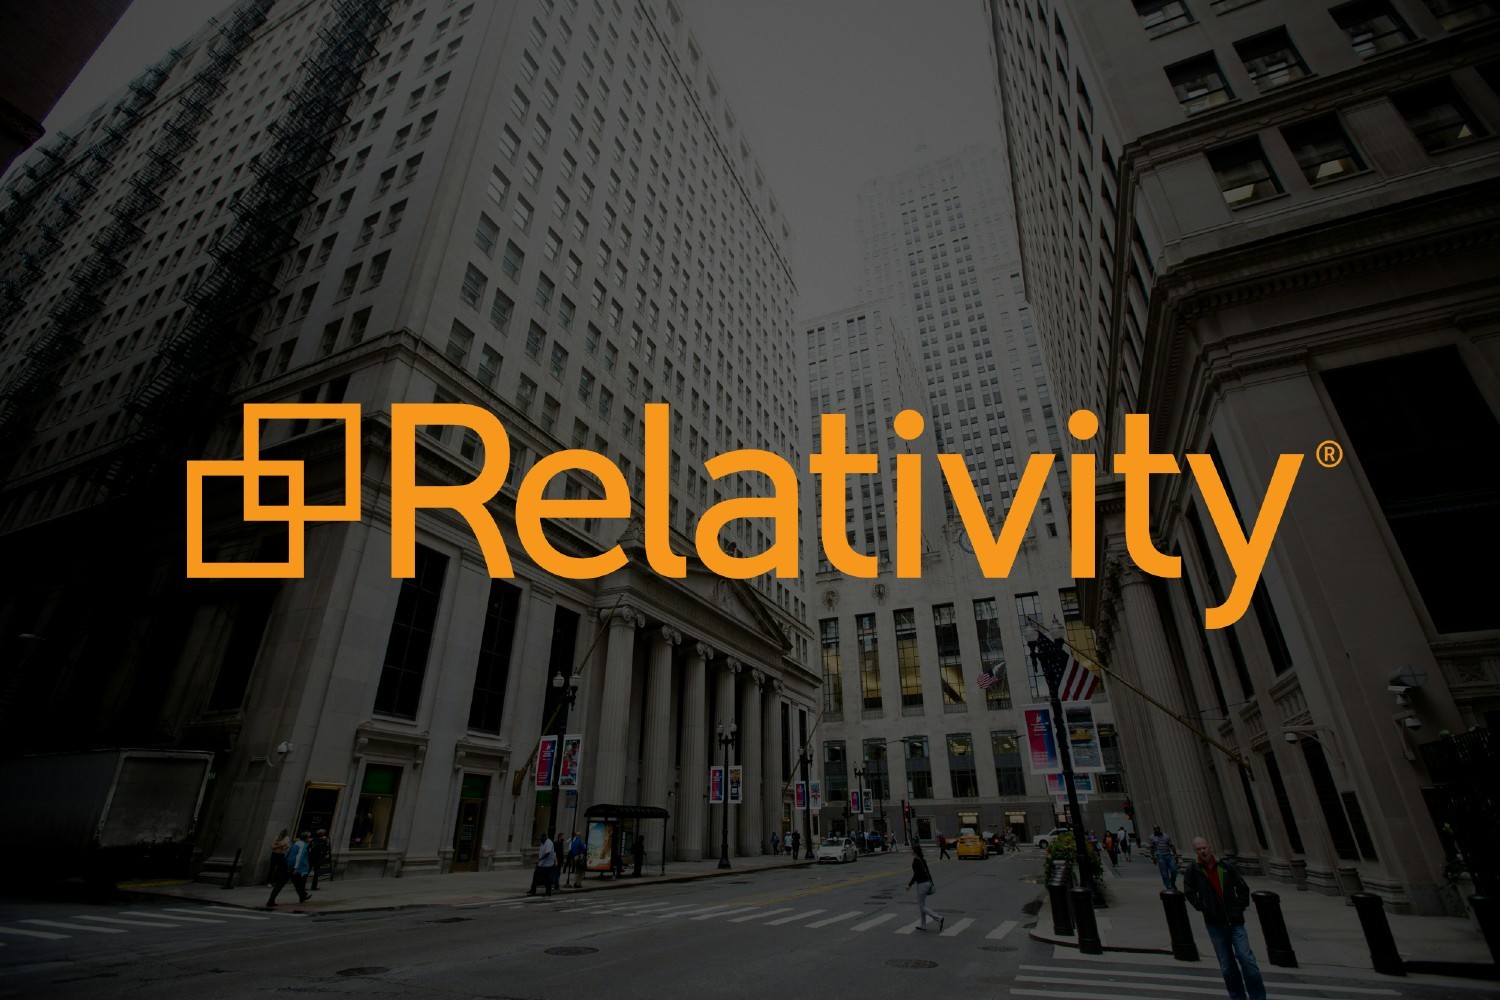 Relativity makes software to help users organize data, discover the truth and act on it.